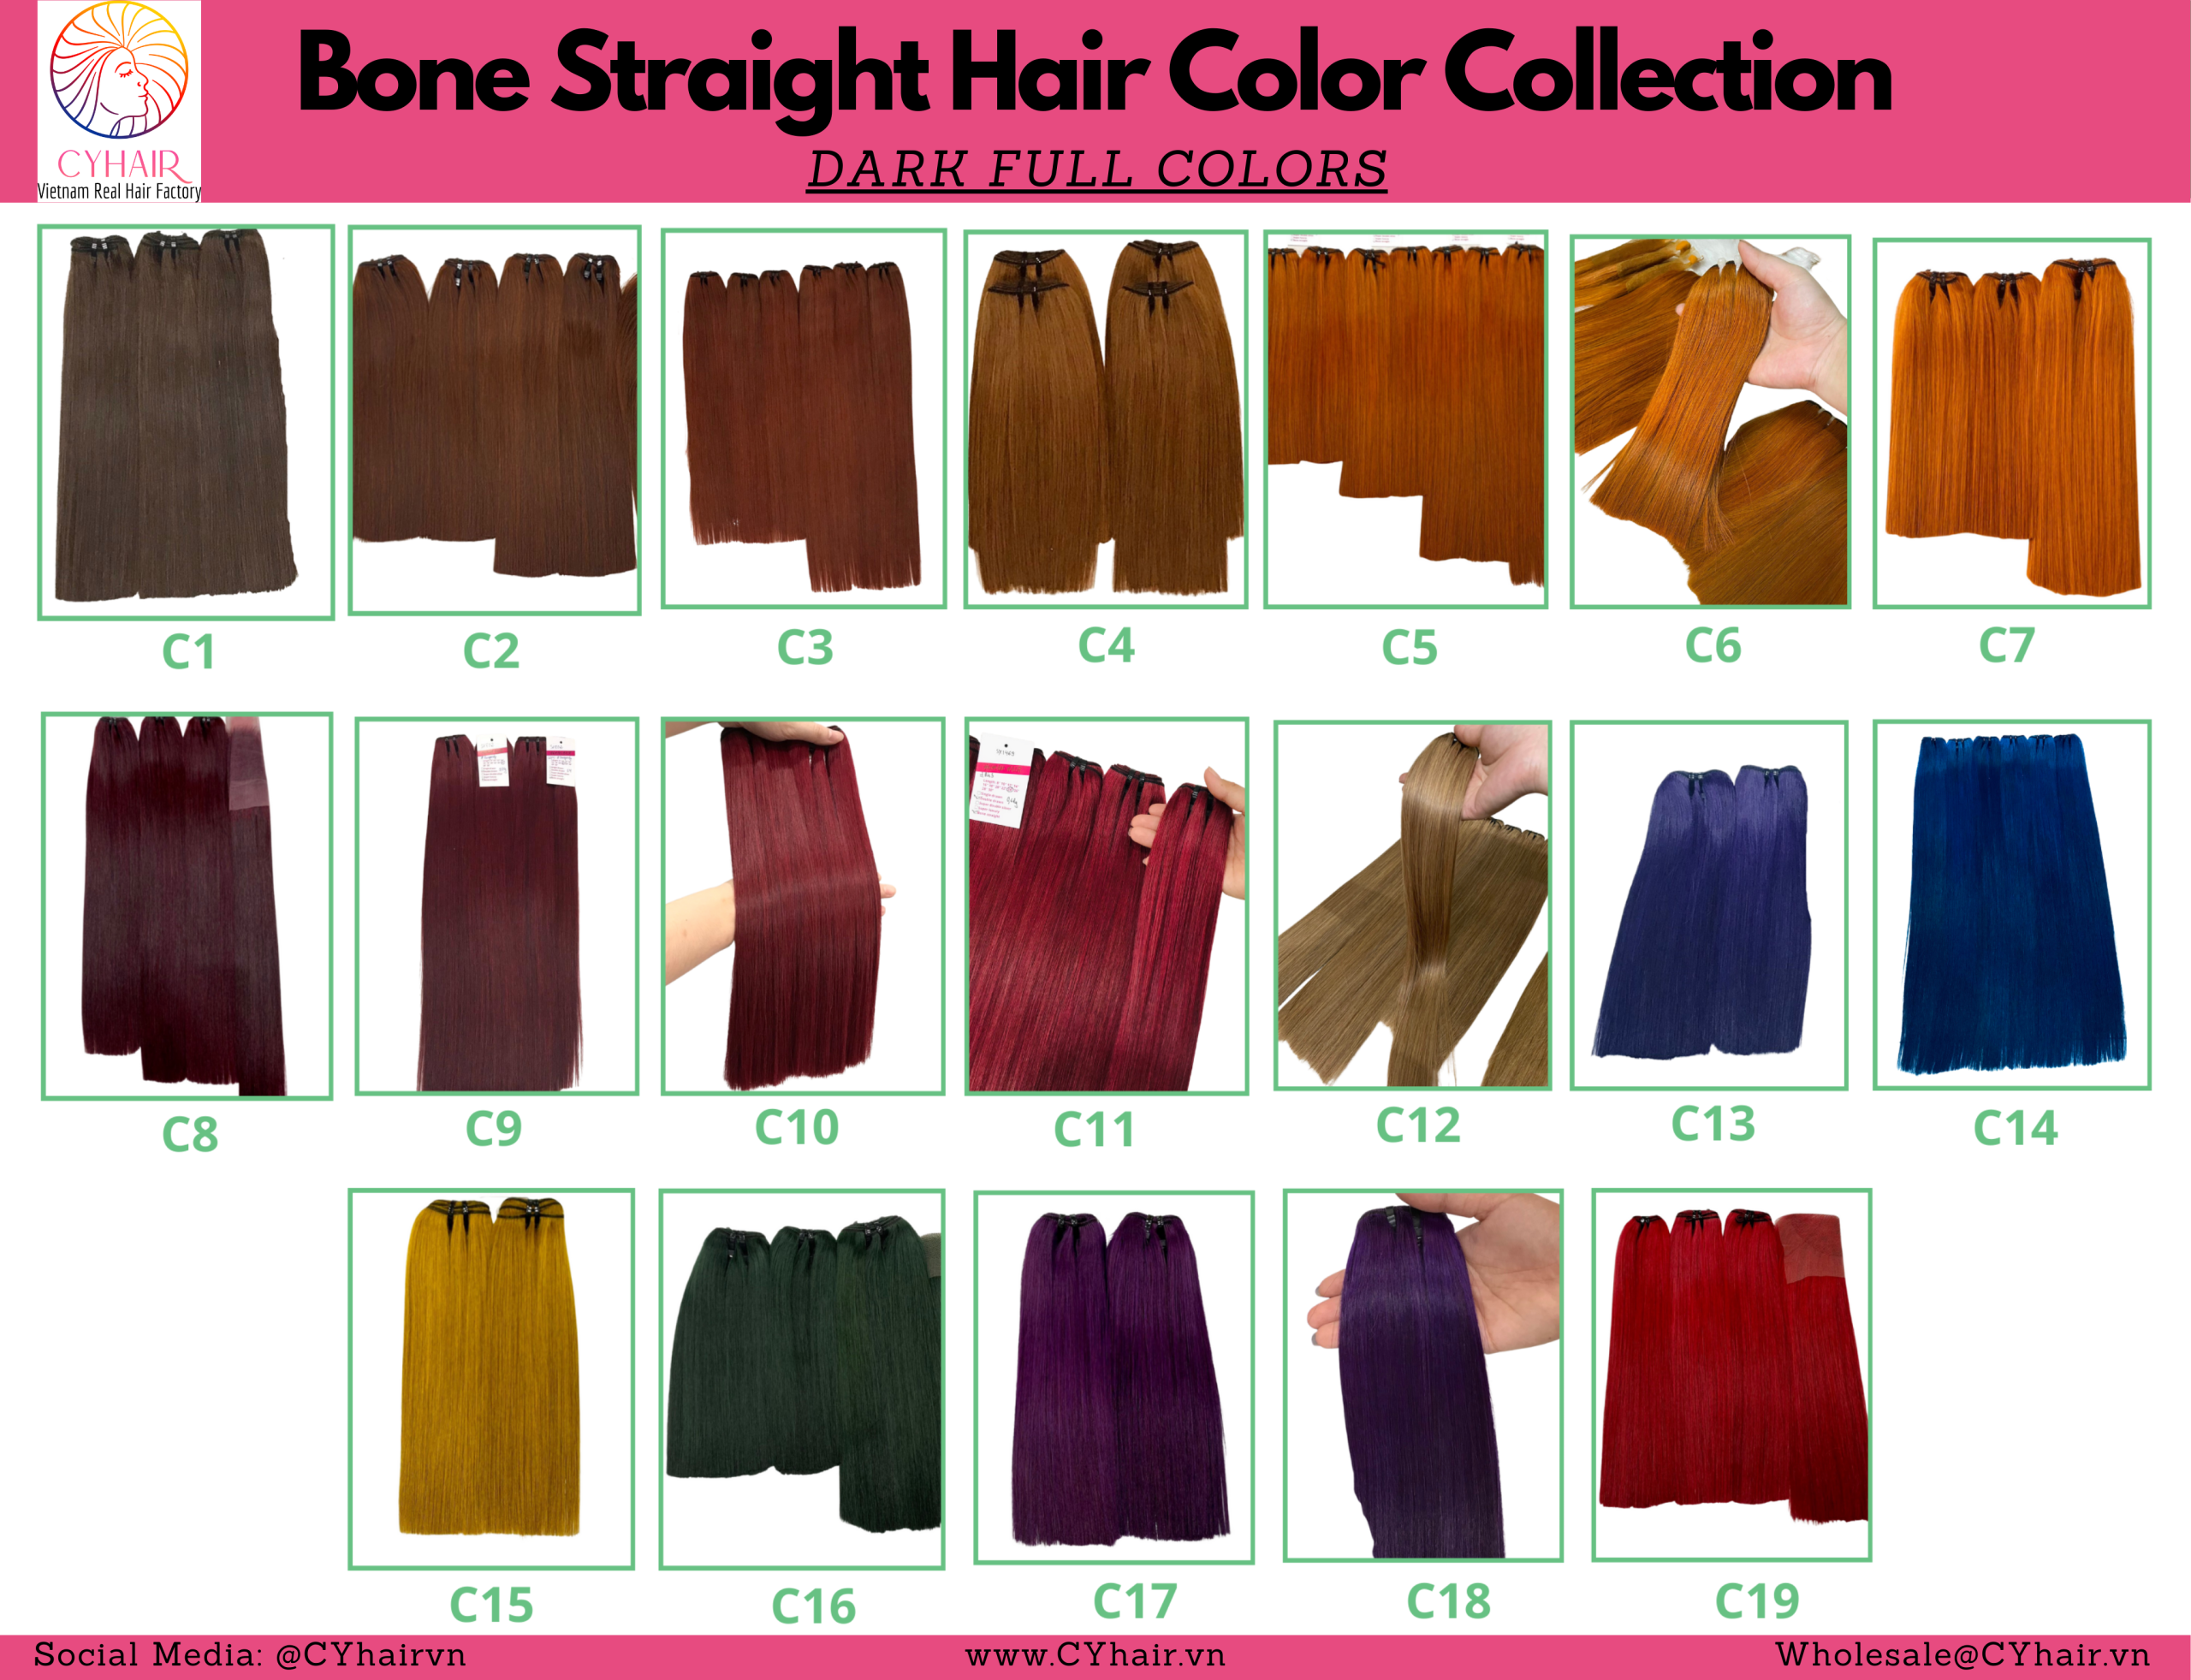 Bone Straight Hair Color Collection - Dark Full Colors